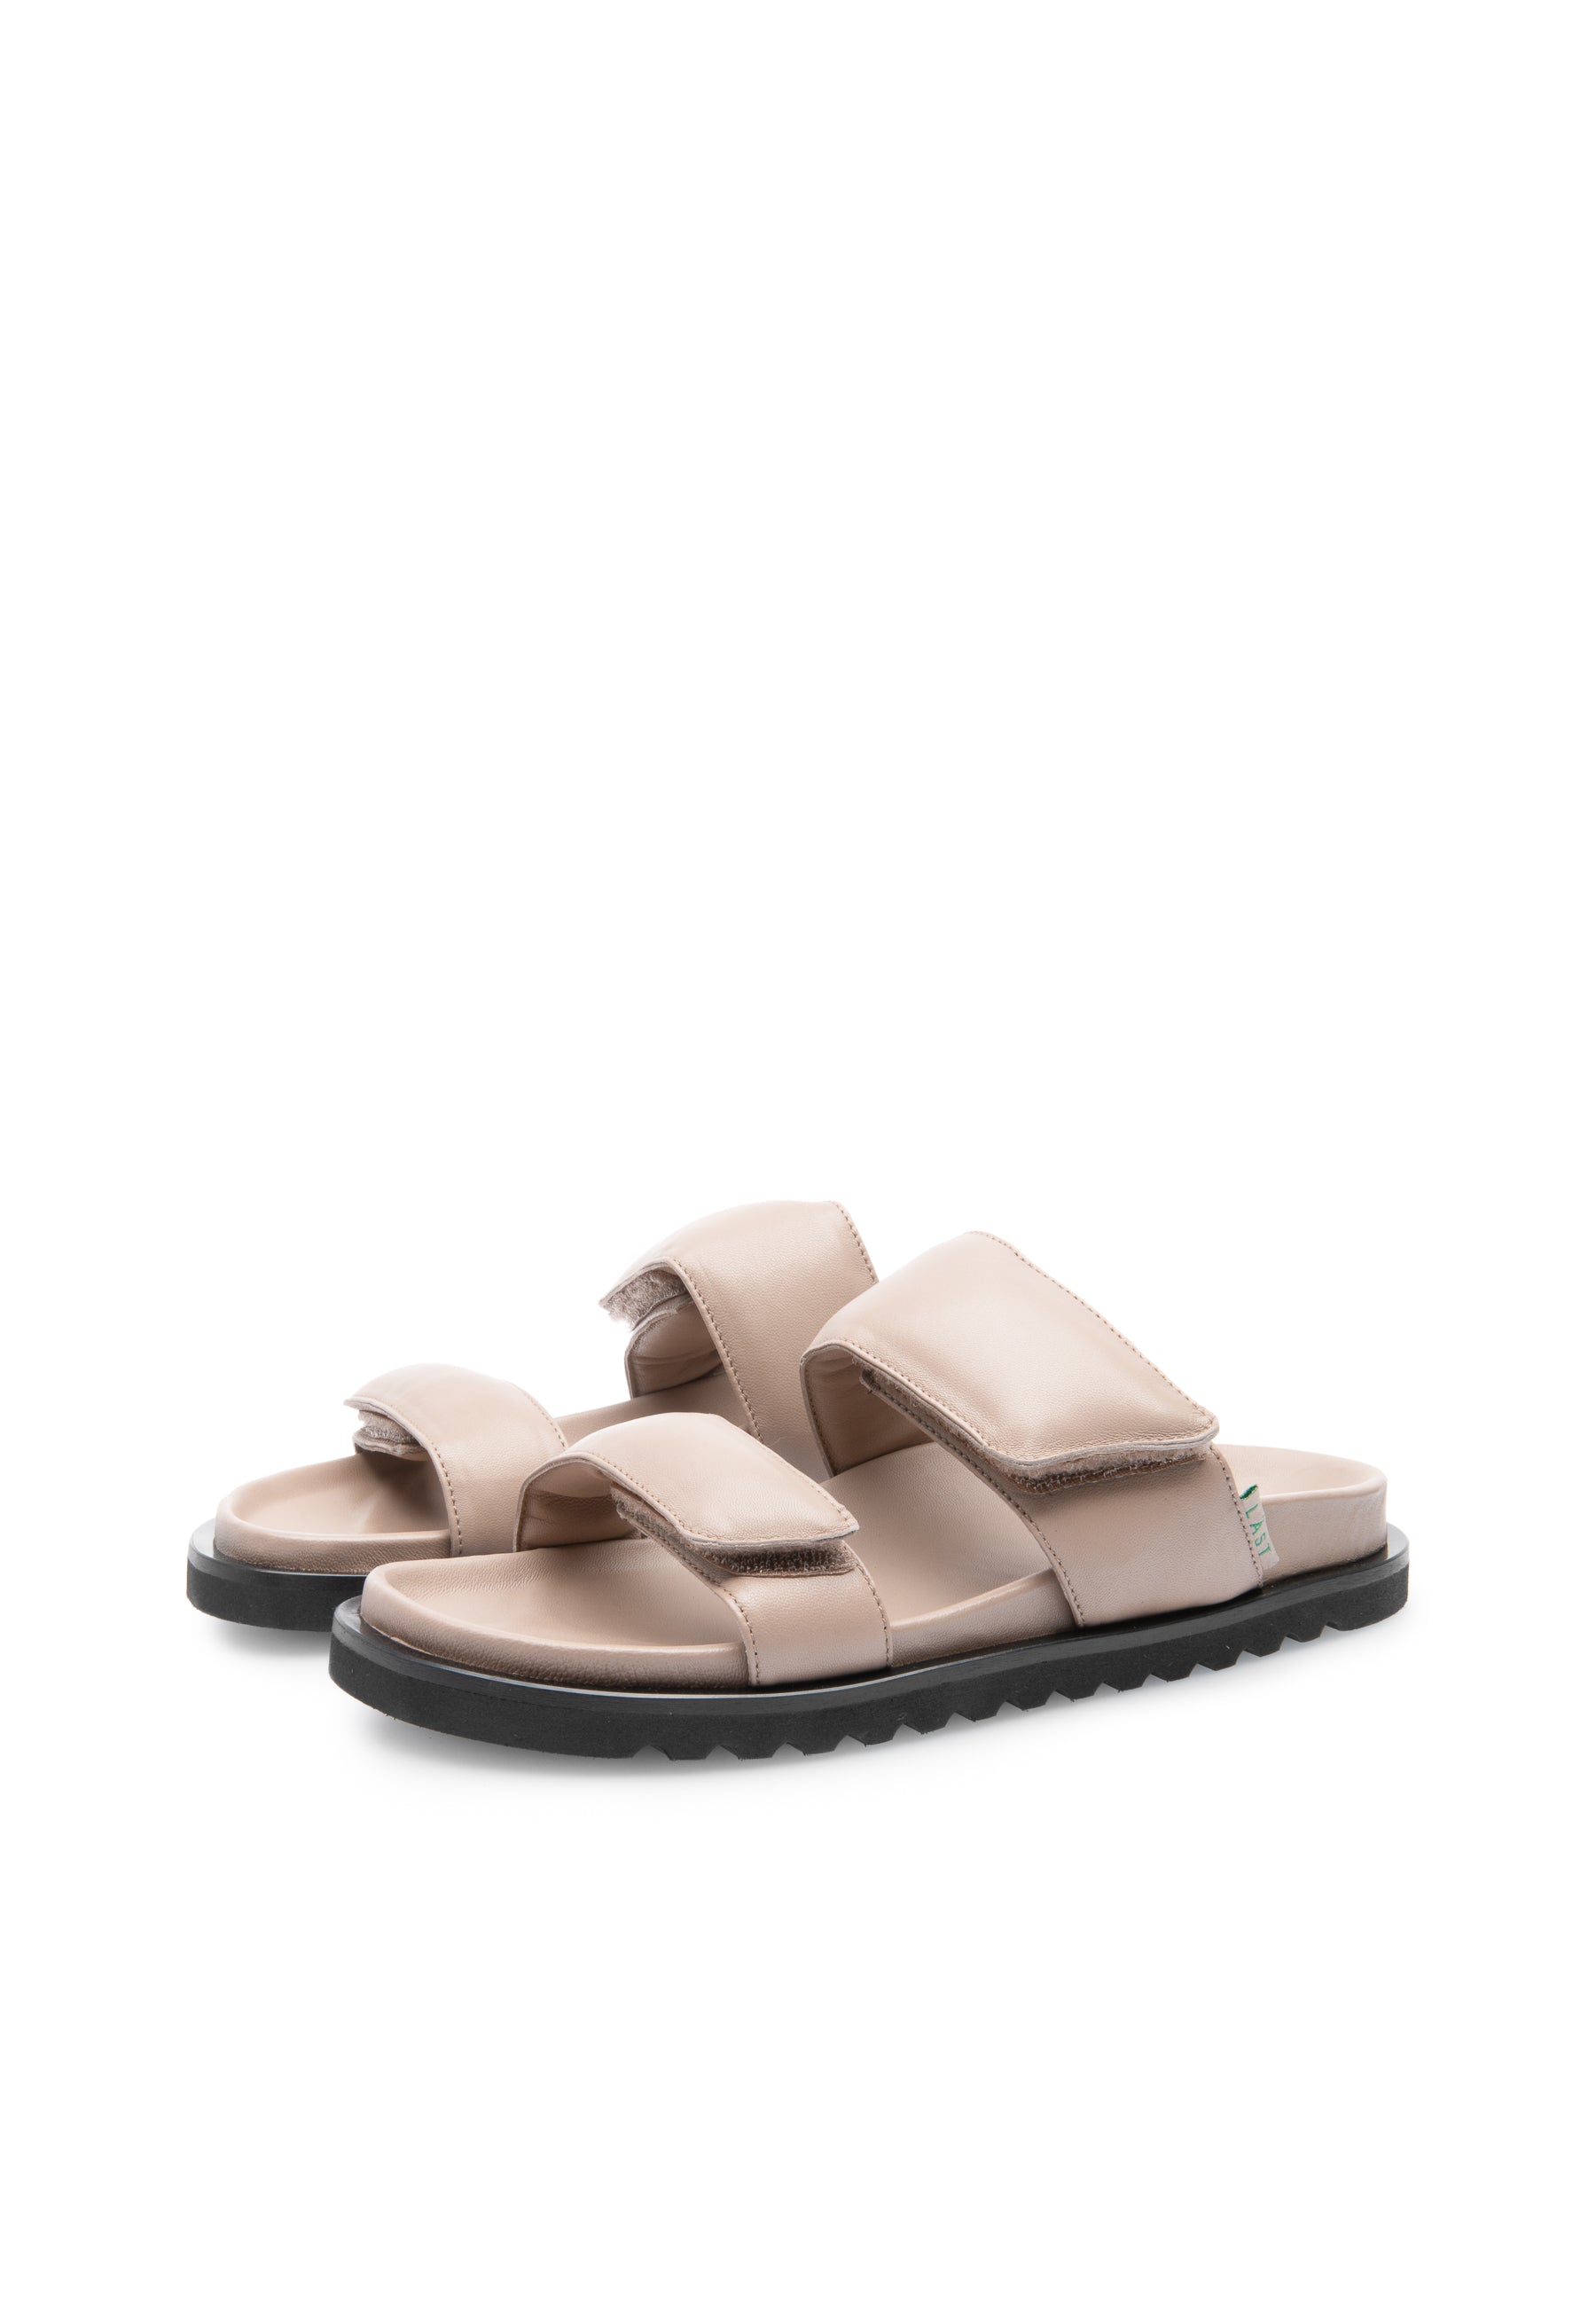 Corine Taupe Leather Puffy Sandals LAST1514 - 5